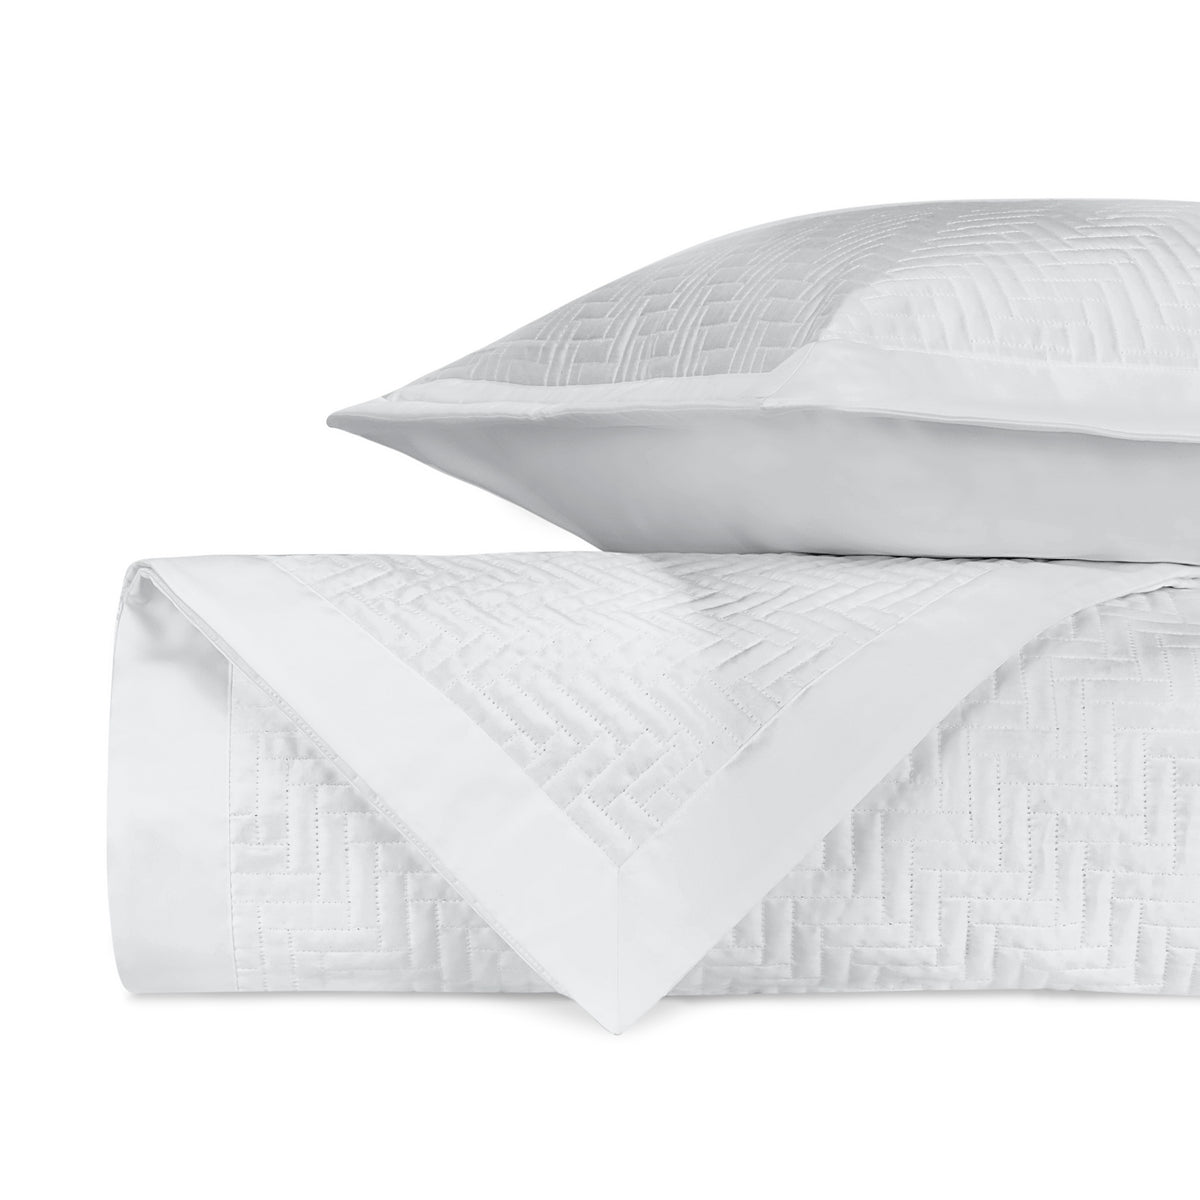 Stack Image of Home Treasures Baxter Royal Sateen Quilted Bedding in Color White